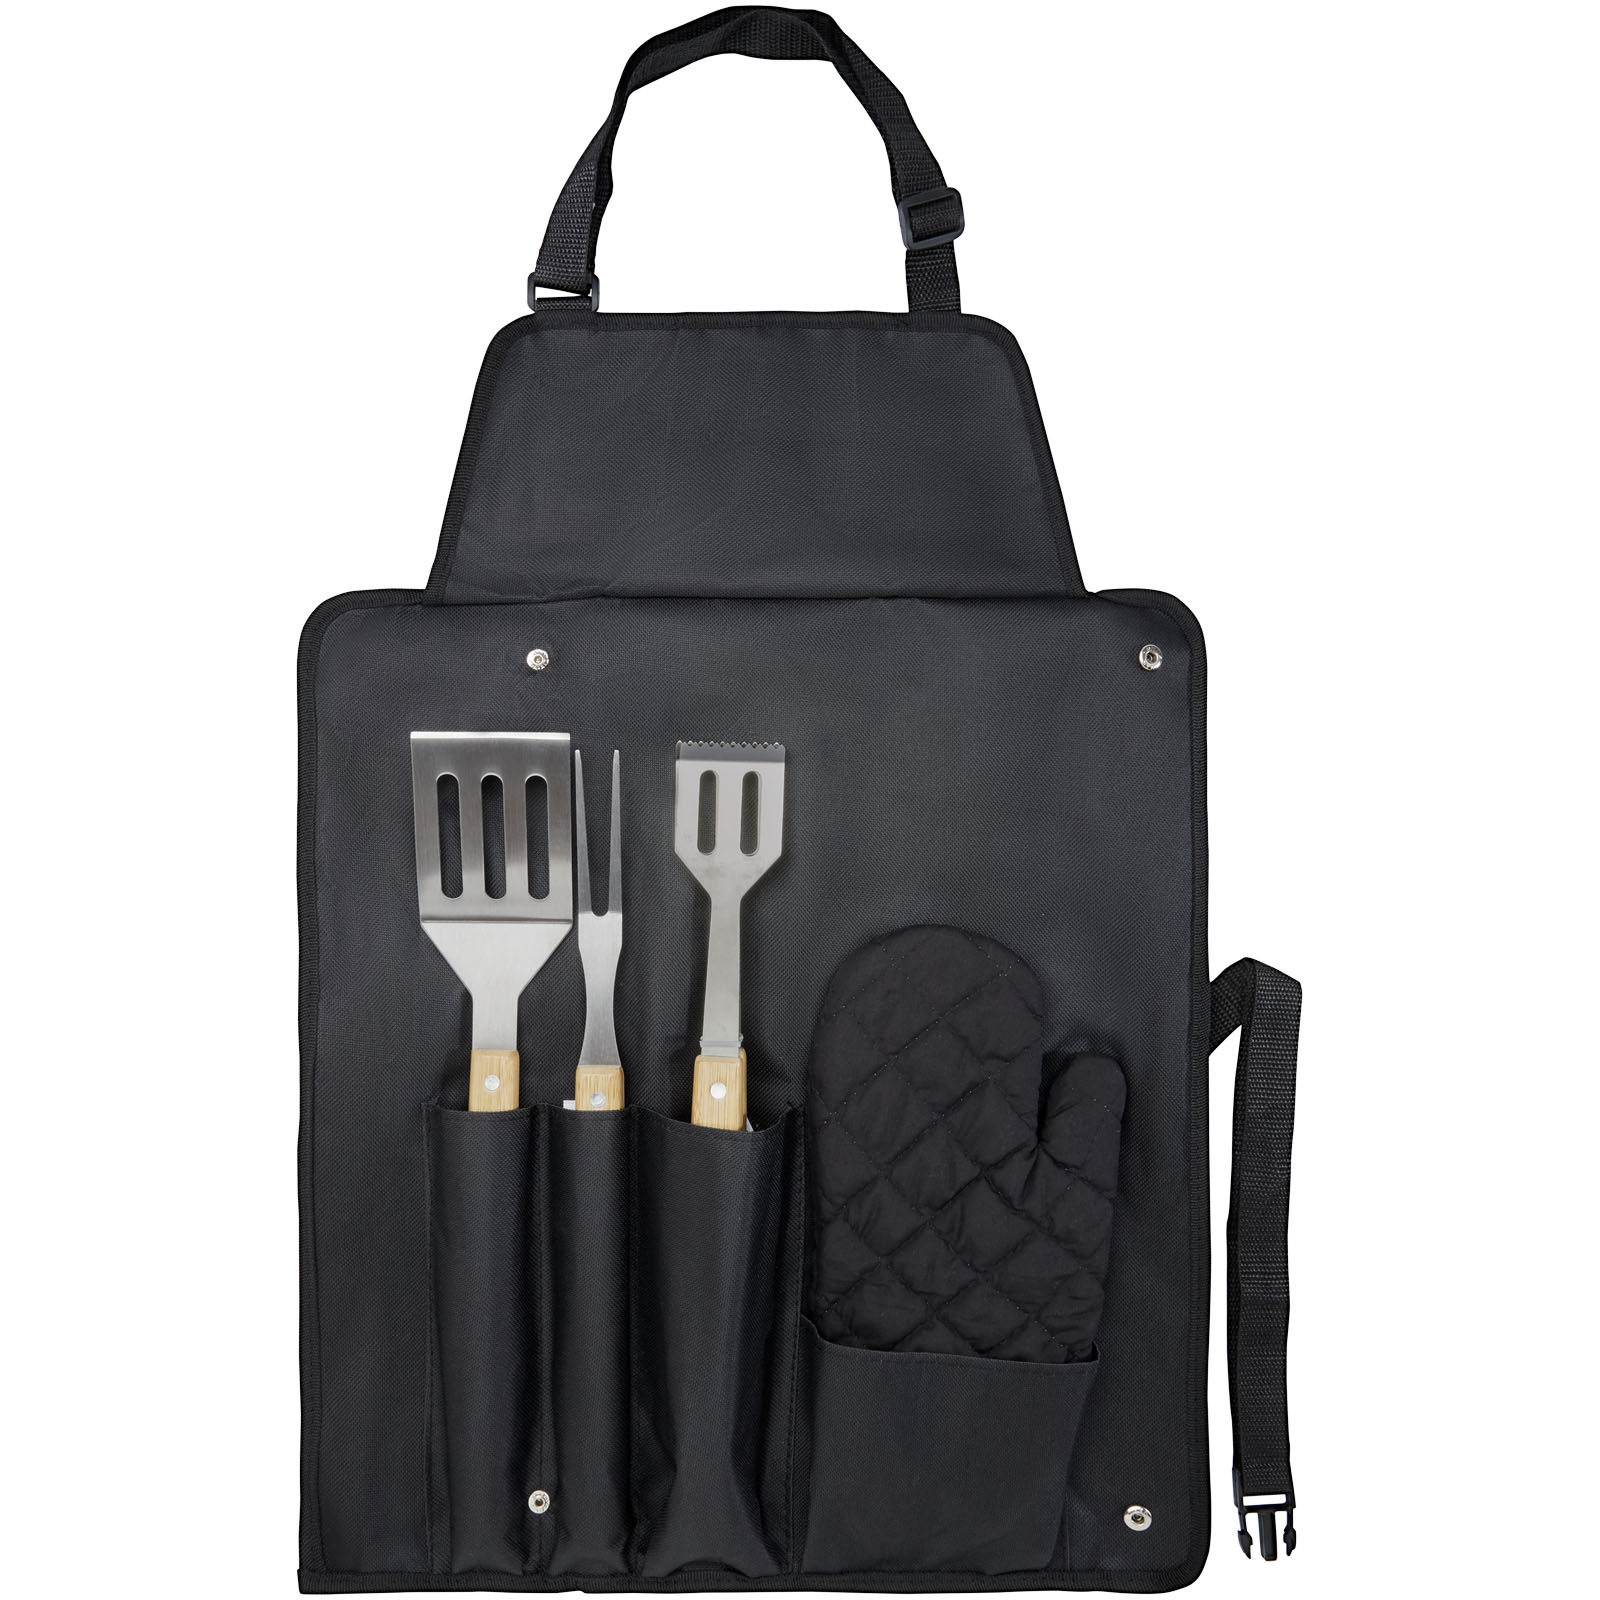 Advertising BBQ Accessories - Gril 3-piece BBQ tools set and glove  - 1